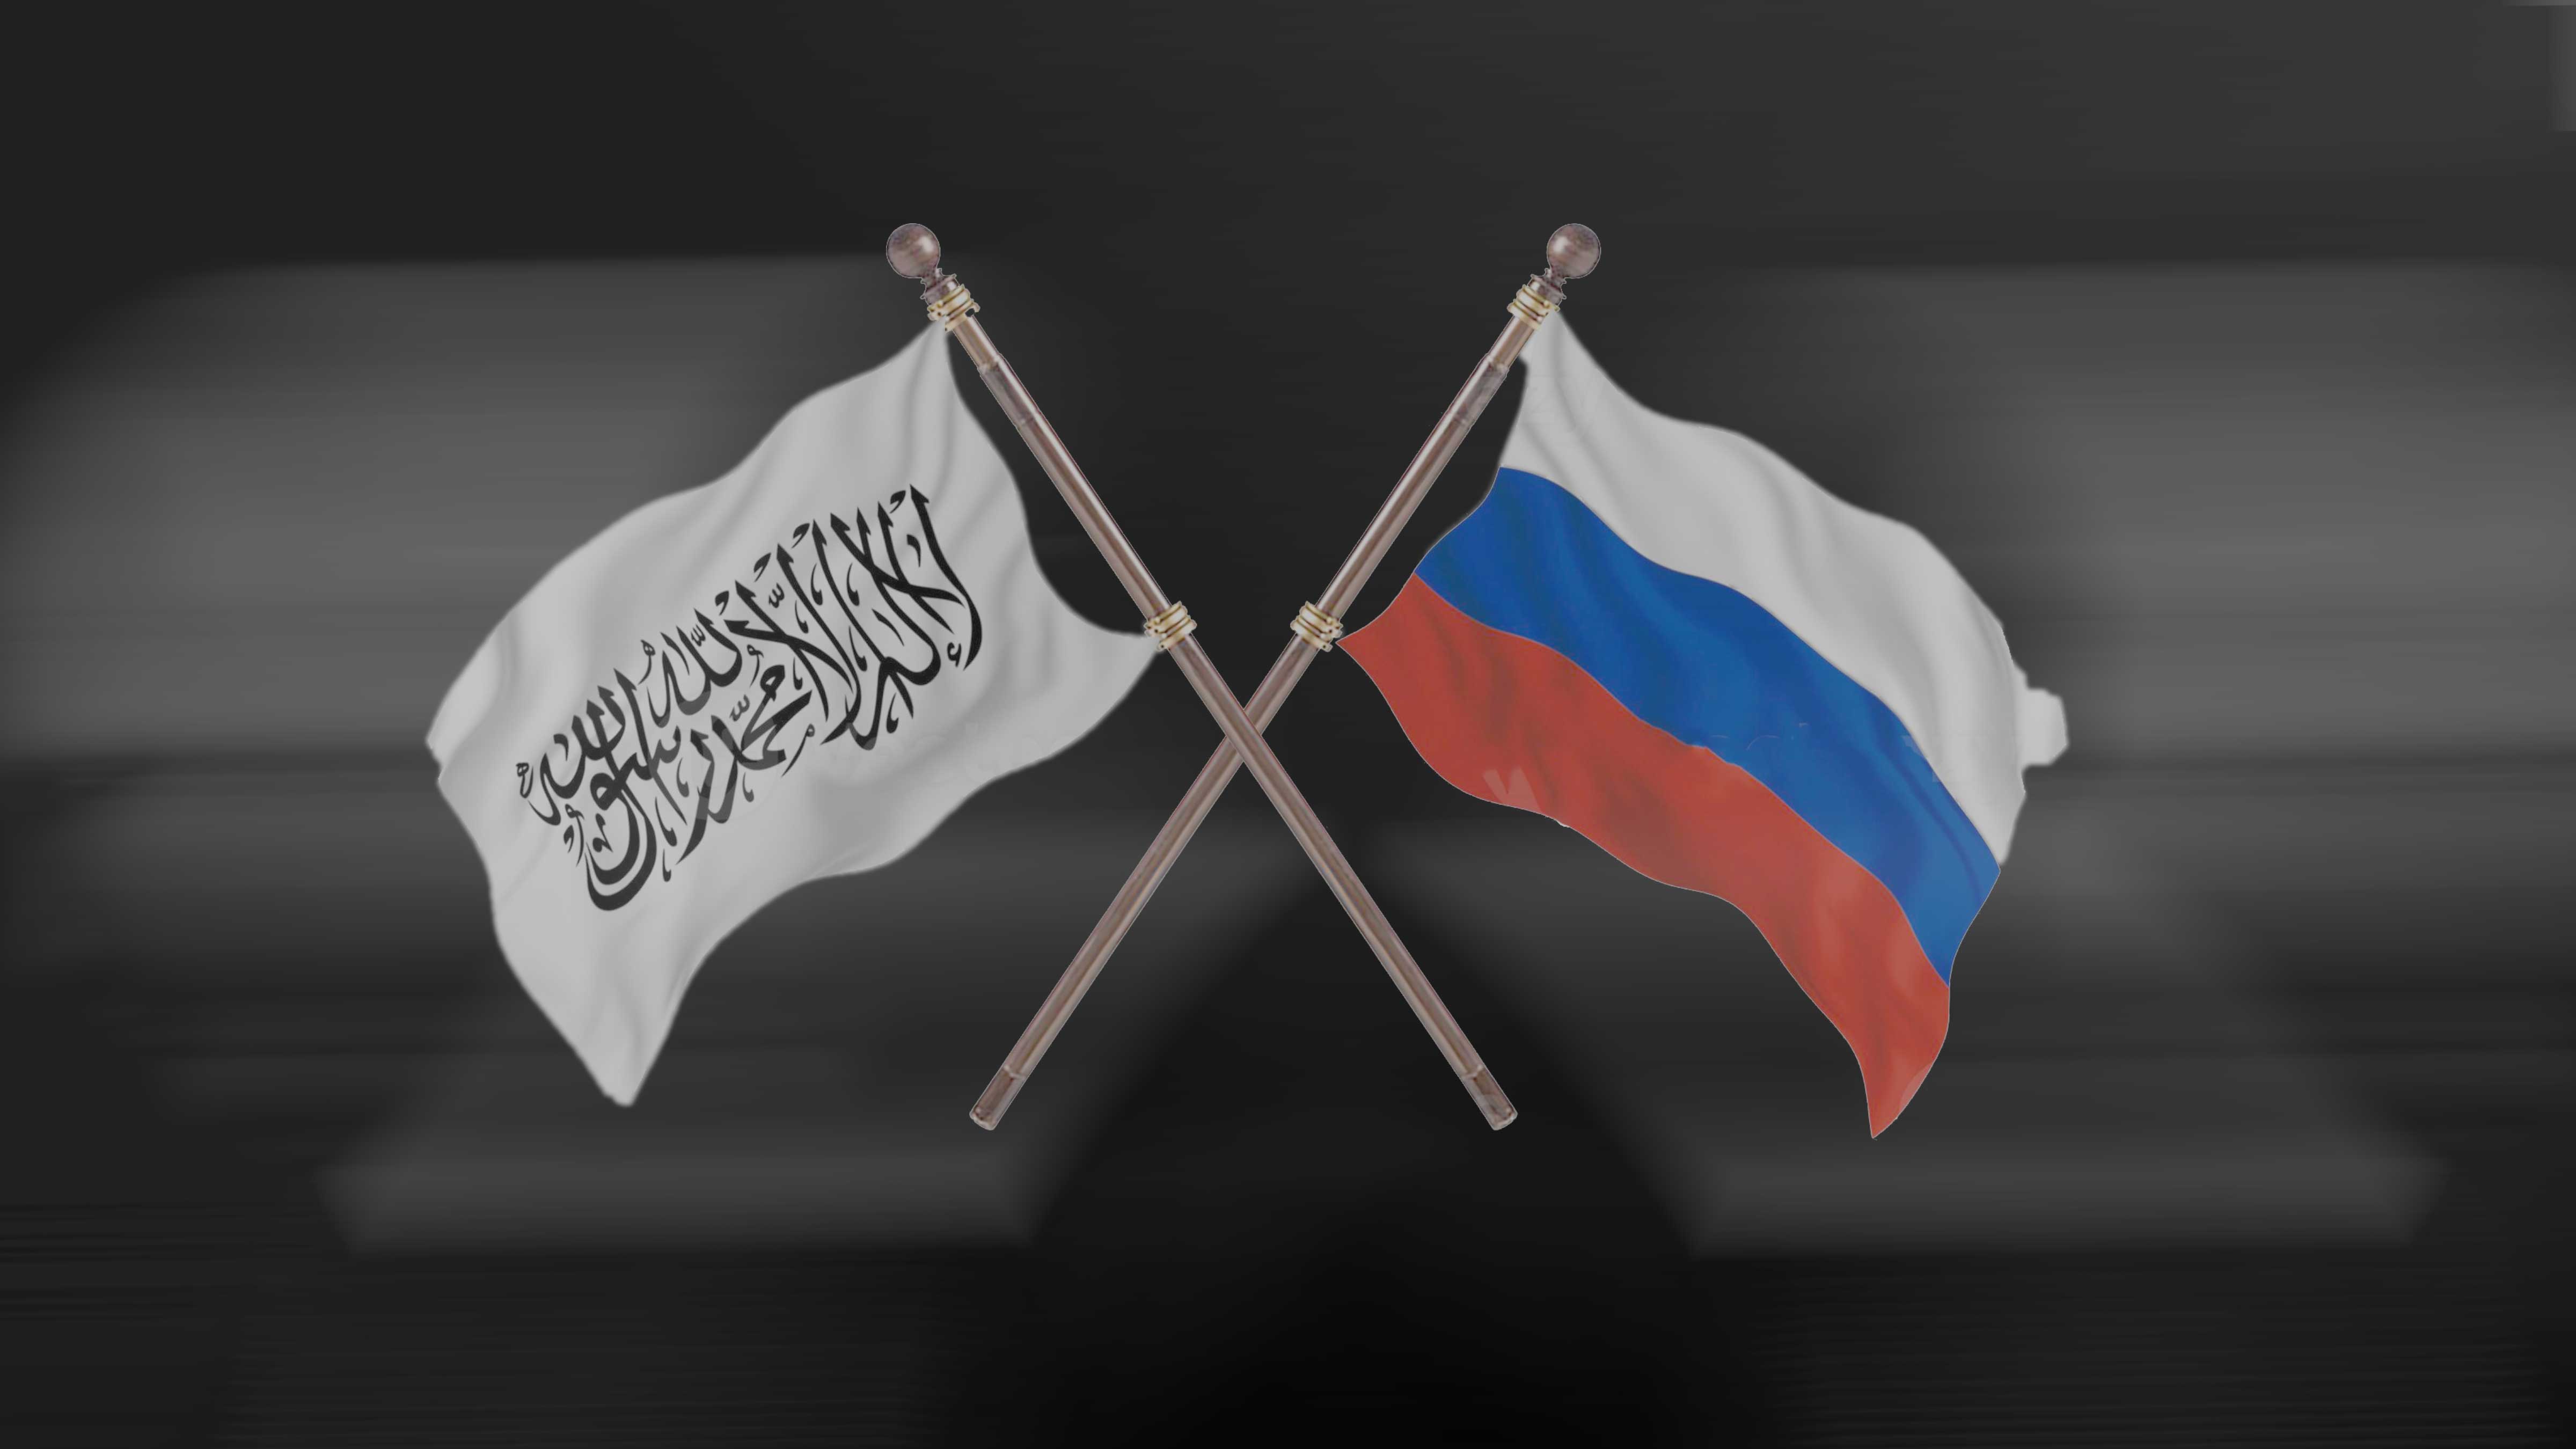 Russia Moves to Establish “Full-Fledged” Relations with Talibanimage